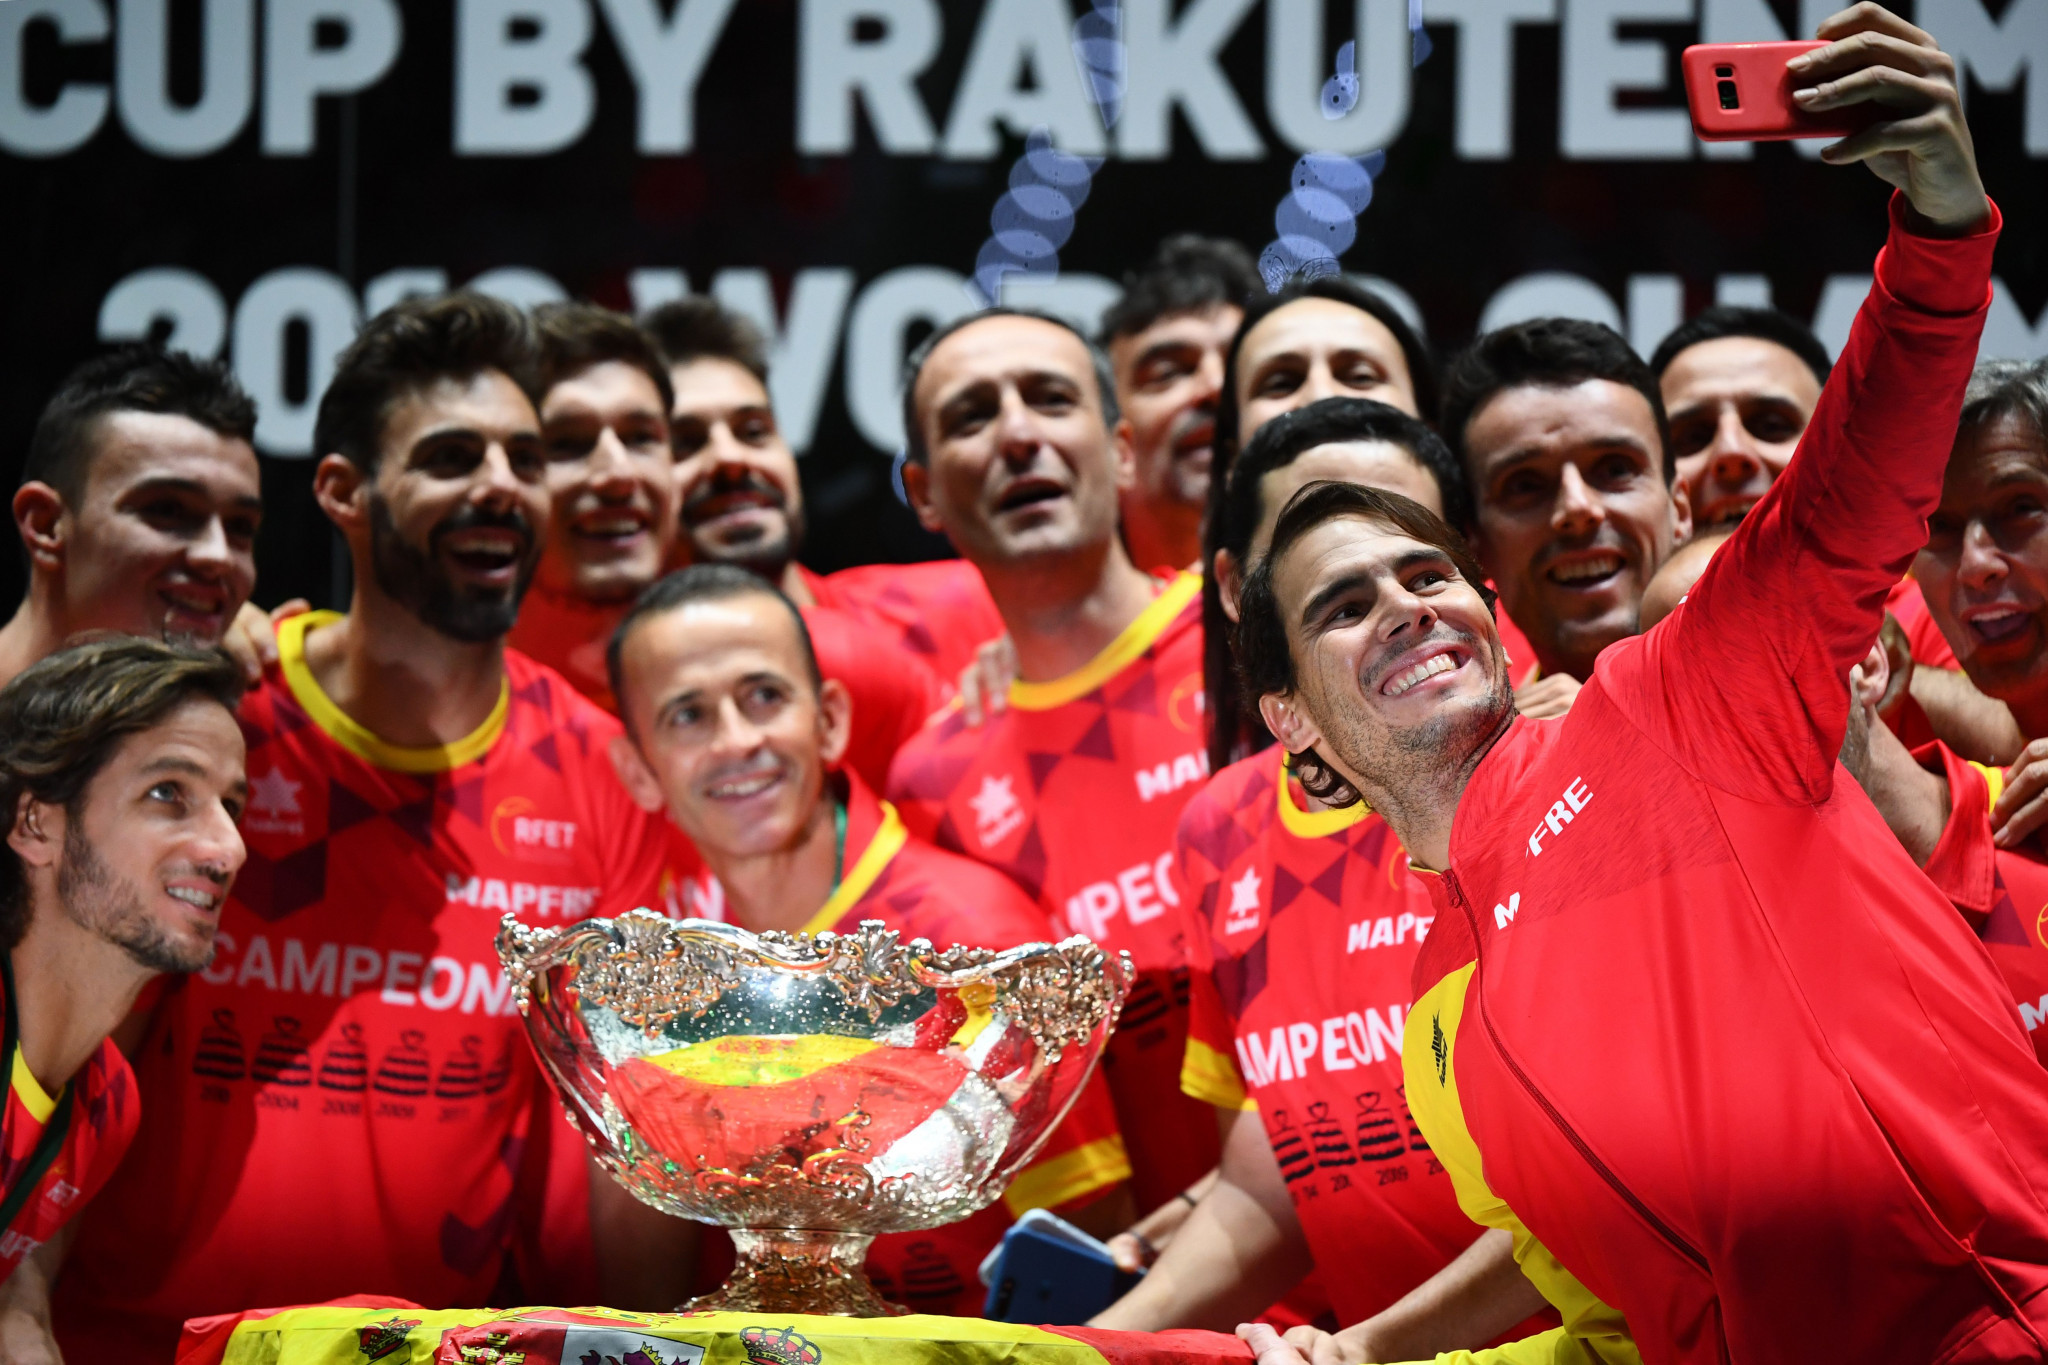 Holders Spain confirmed as top seeds for 2020 Davis Cup Finals draw